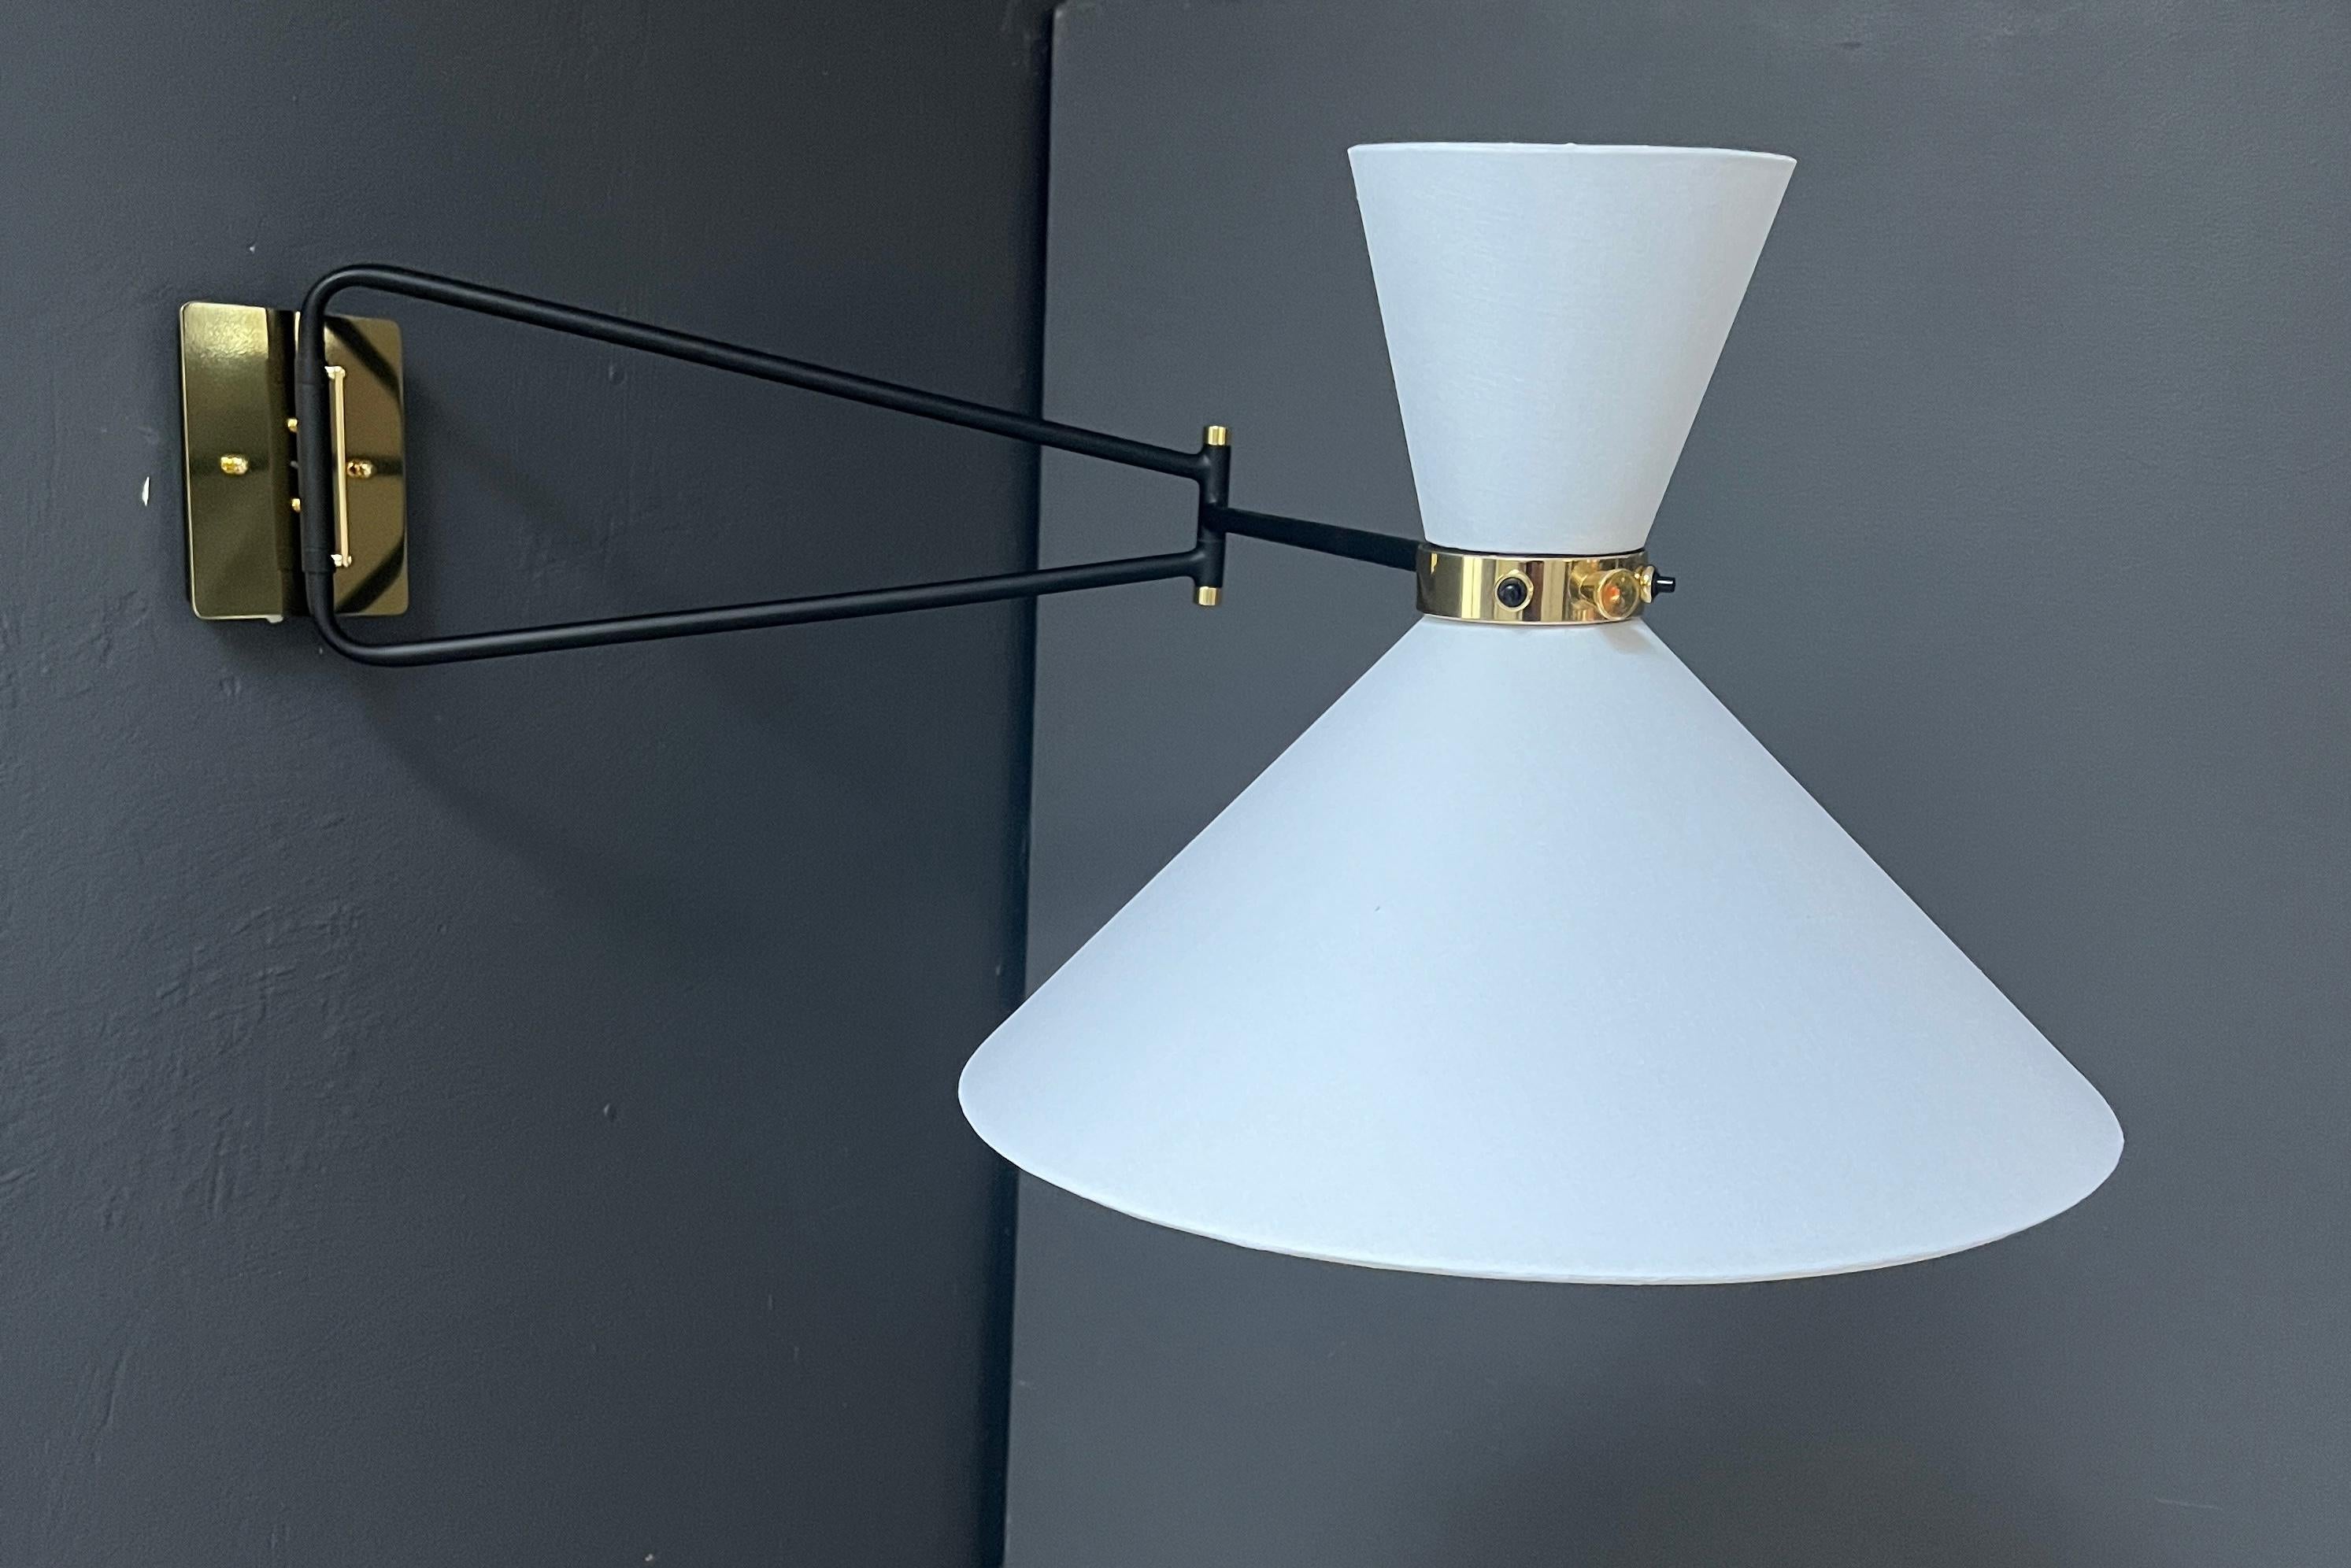 This sleek sconce is 1950s French midcentury by inspiration. The light with its double shade and articulated arm creates a versatile lighting source. The head pivots to direct the light of the two candelabra based bulbs in various direction while